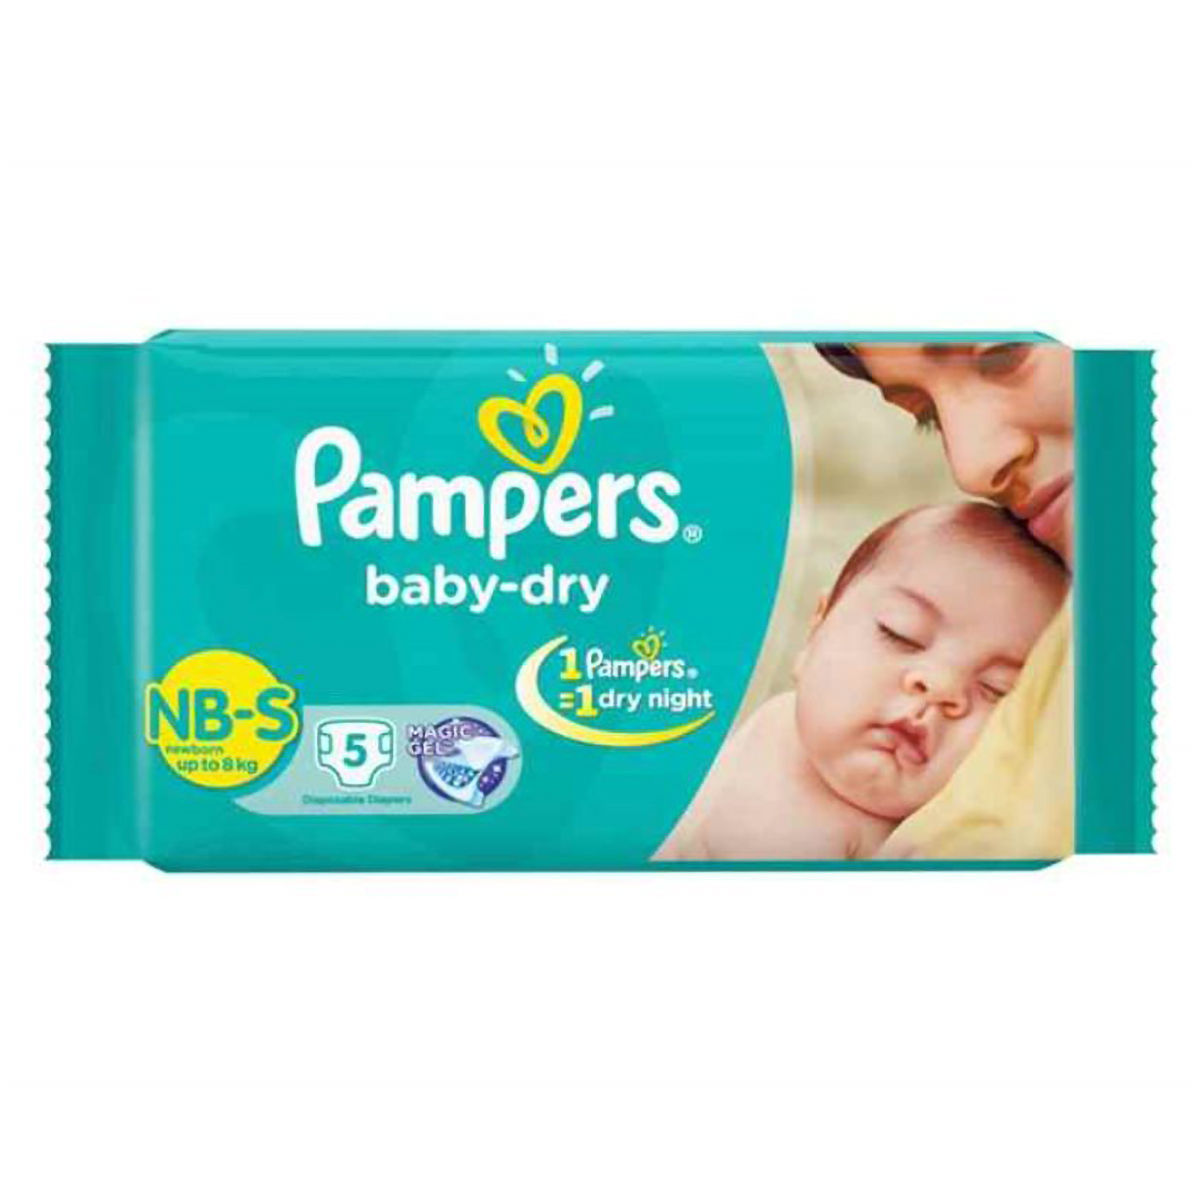 Pampers Baby-Dry Diapers Small, 5 Count, Pack of 1 